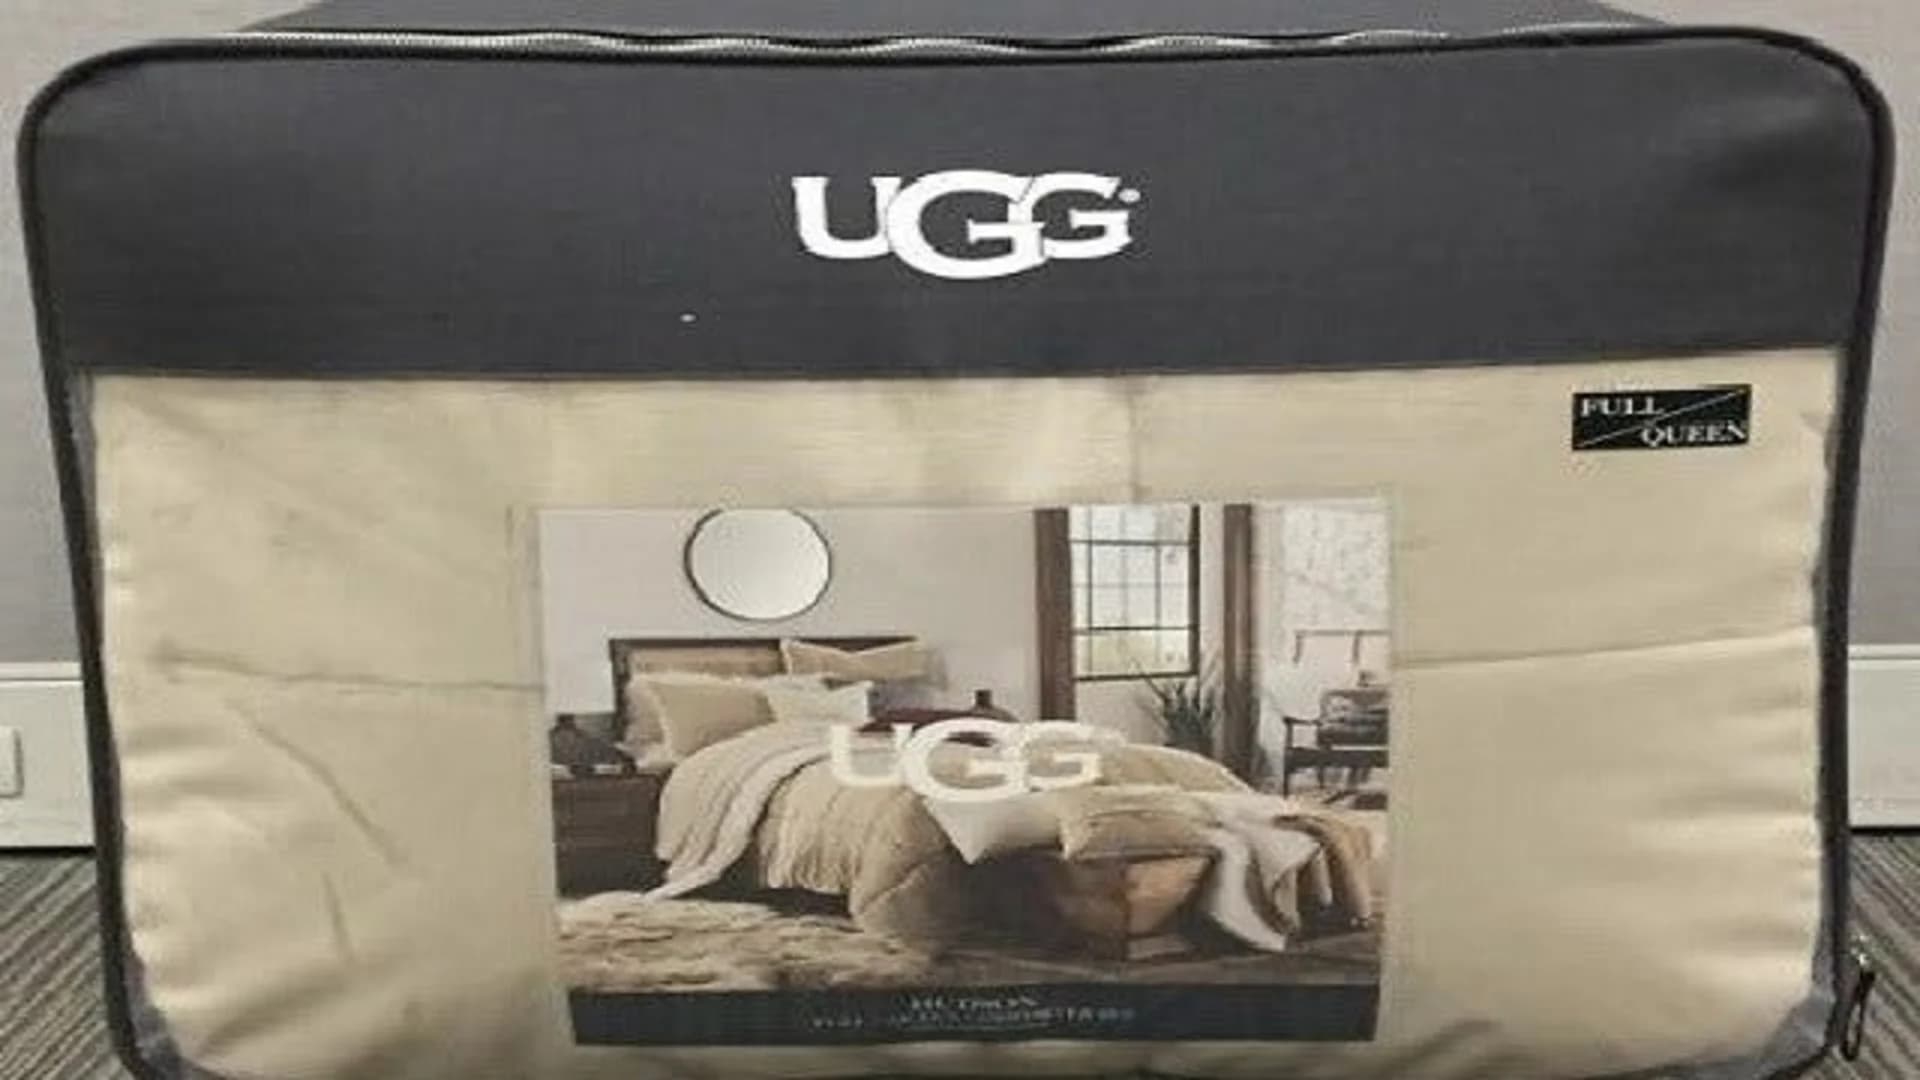 About 175K UGG comforters recalled due to mold exposure risk